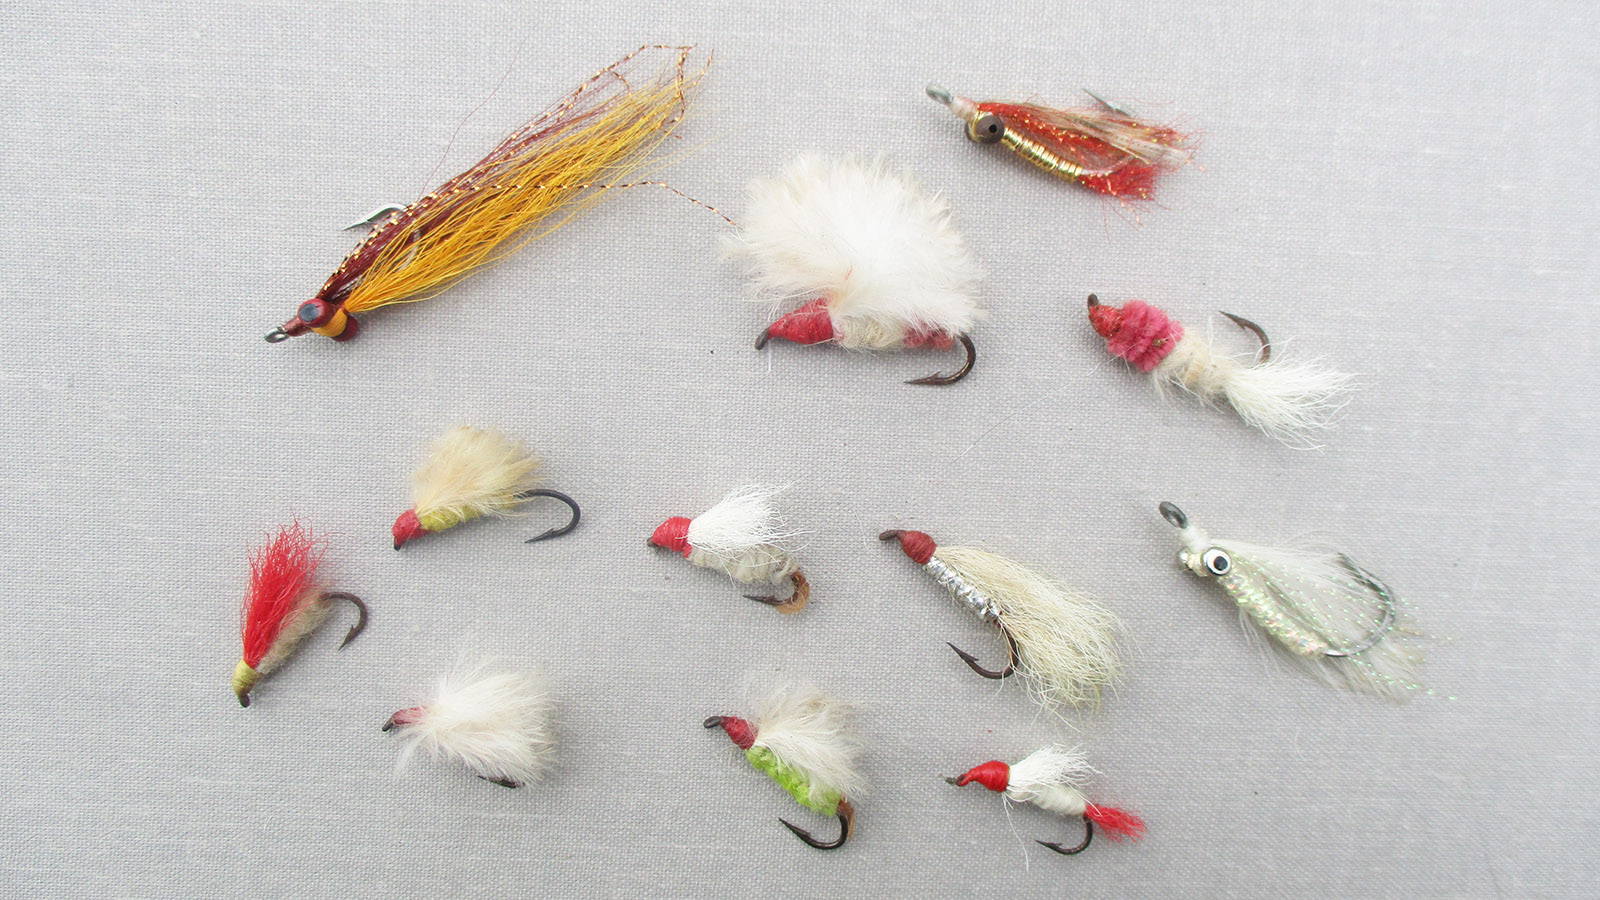 An image of 12 different flies of various color and material combinations. 